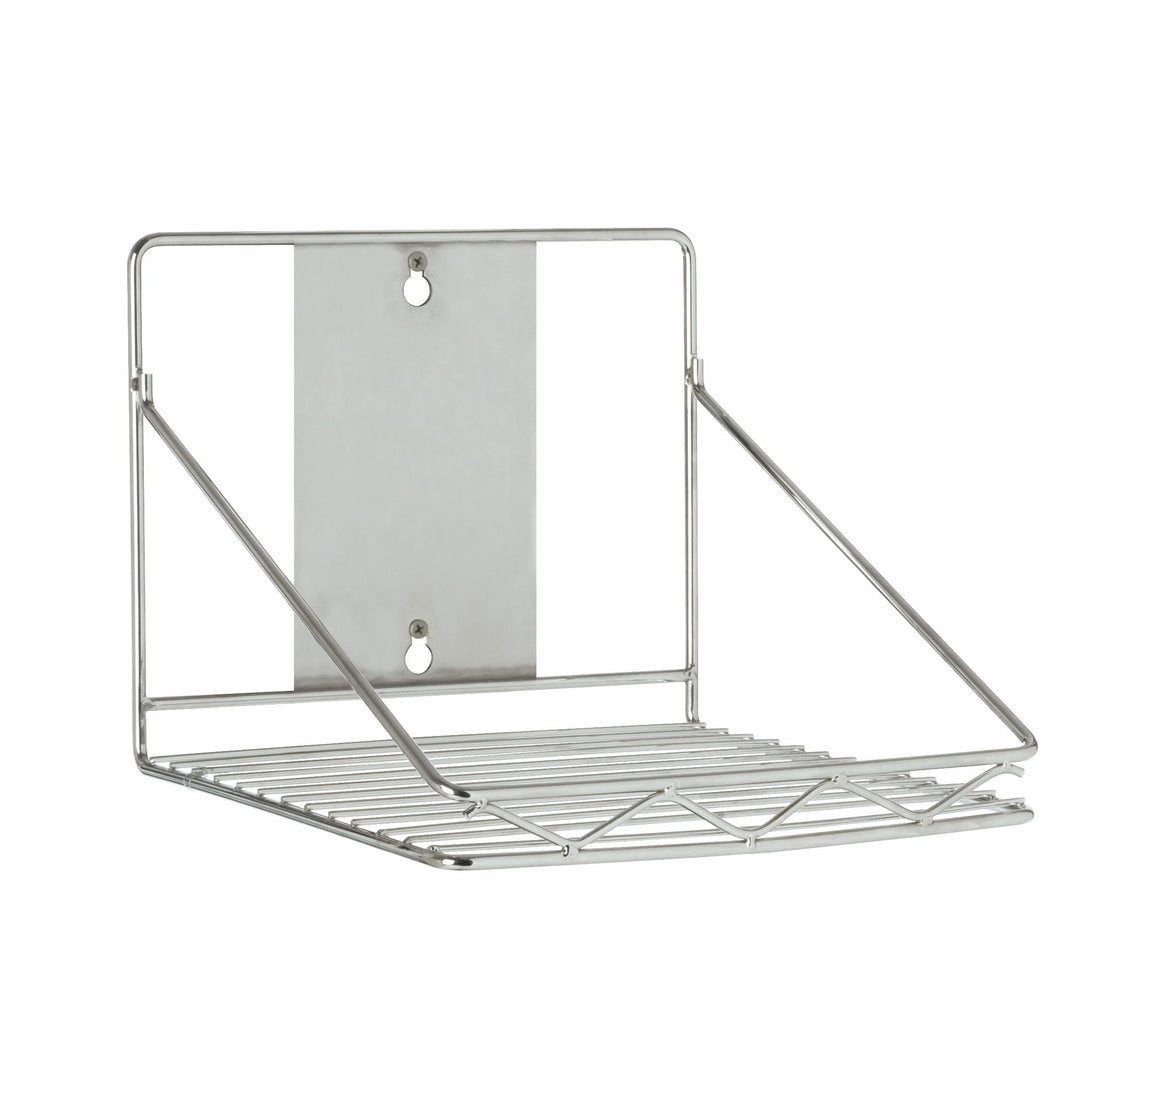 S/S WALL MOUNTED RACK for (9G60 INGREDIENT BIN)